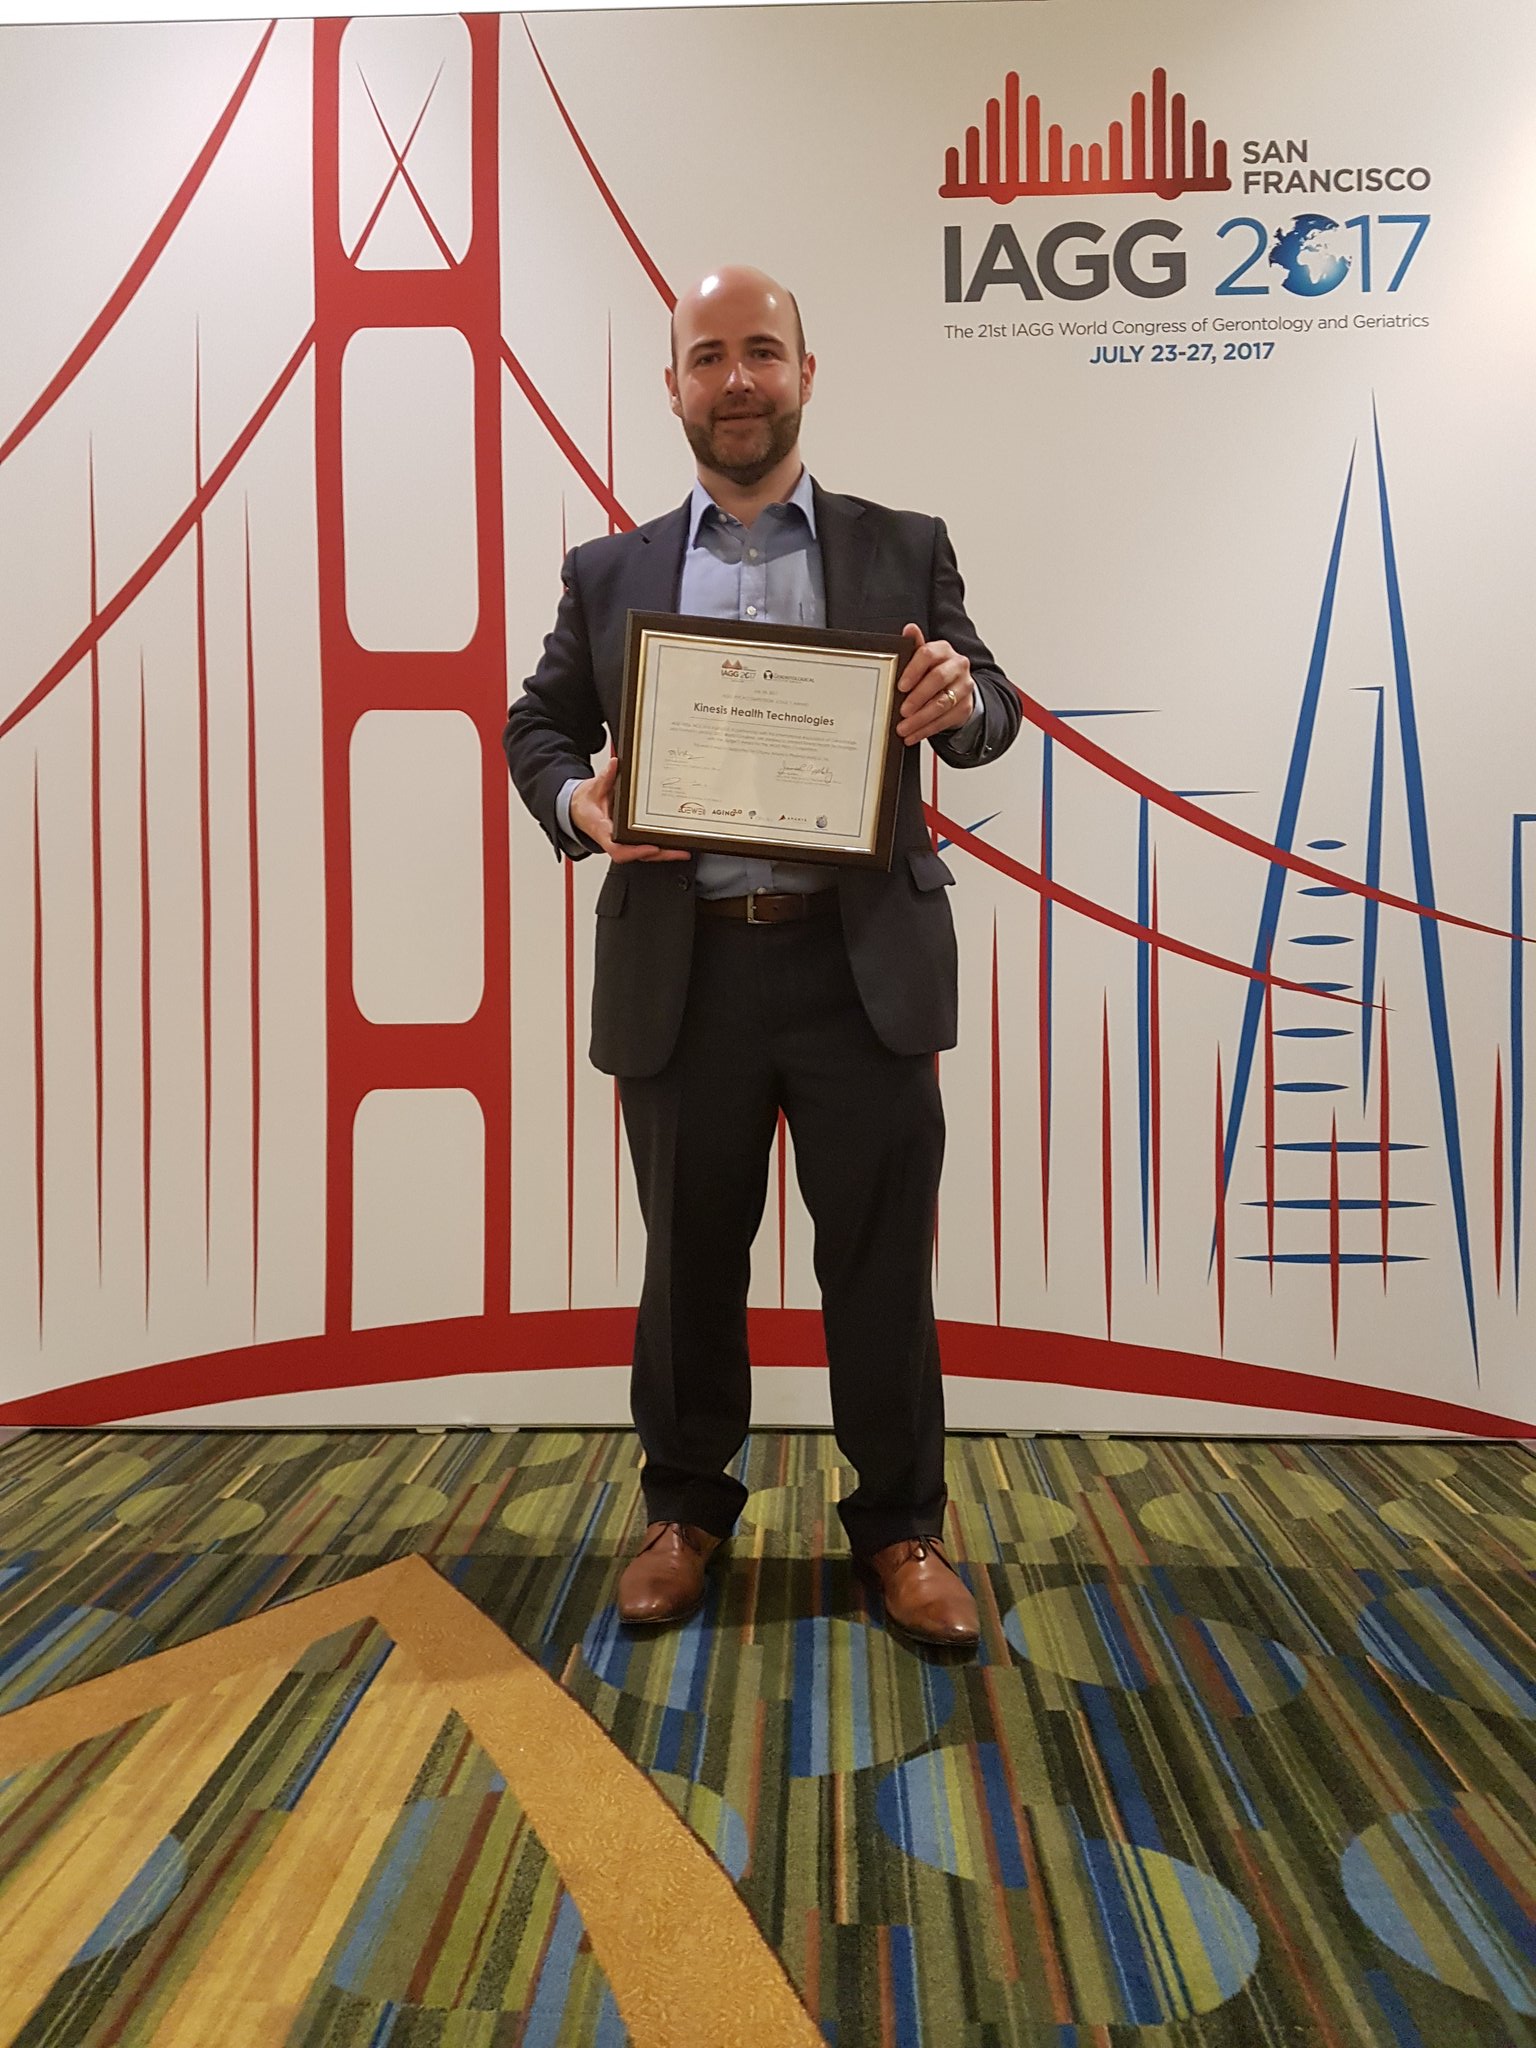 Kinesis win IAGG 2017 tech day pitch event!